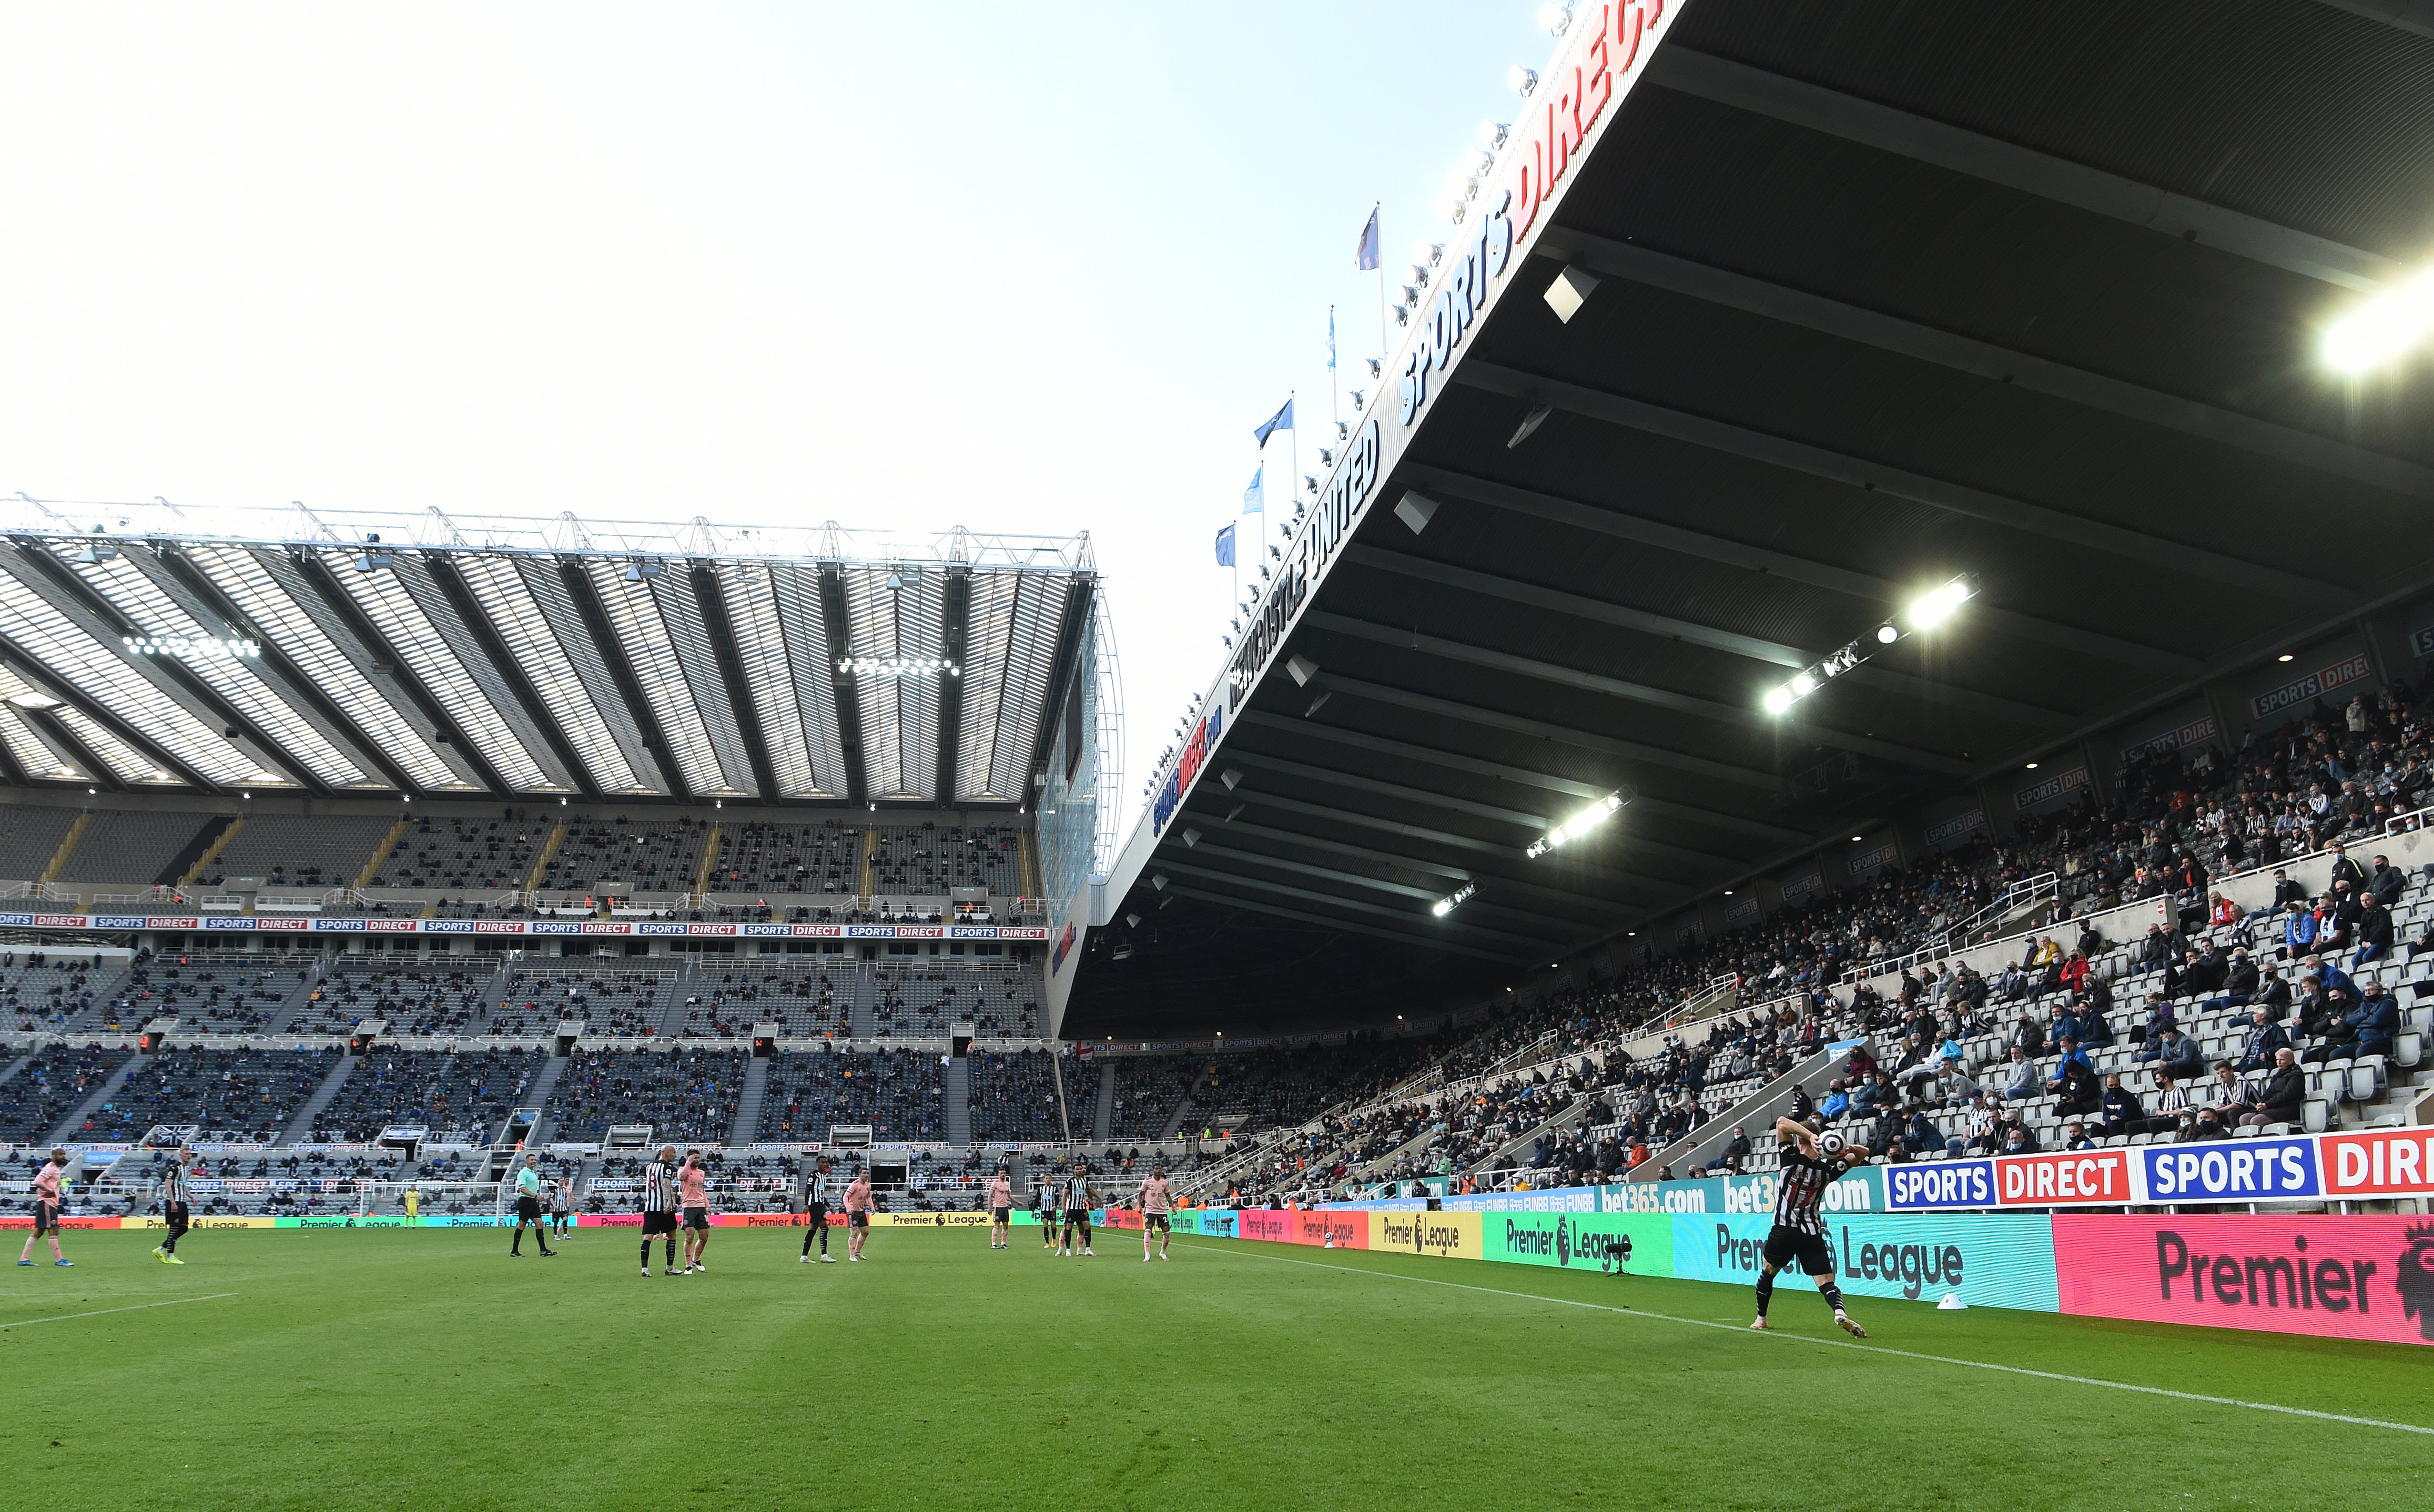 St James’ Park during its first game with fans back after a coronavirus-enforced absence this year